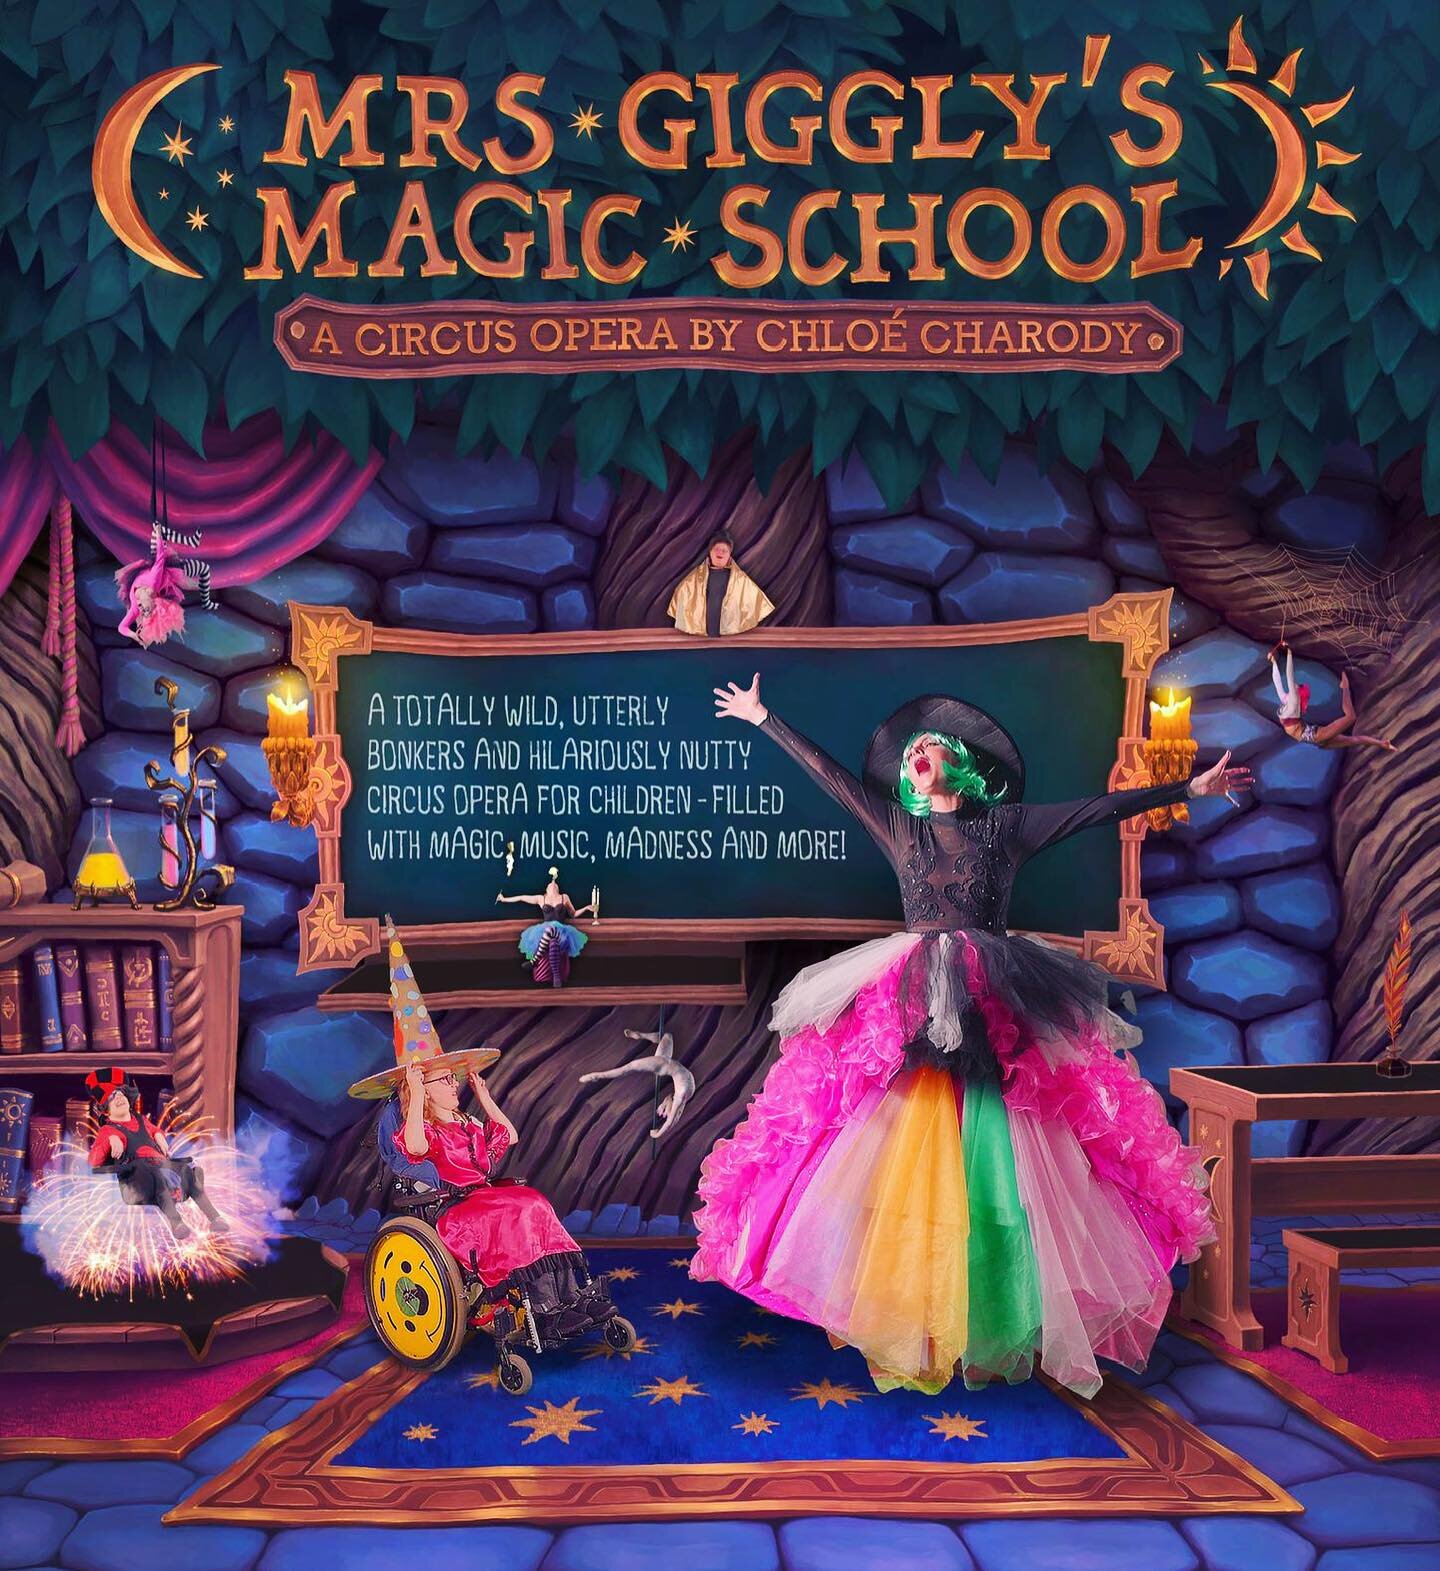 &lsquo;Mrs Giggly&rsquo;s Magic School&rsquo; will be coming to a city near you in 2024! #tourdates will be announced soon&hellip; 🔮✨
&hellip;
#artwork by @krioukov.creations 
&hellip;
#mrsgigglysmagicschool #chloecharody #chloecharodycreations #cir